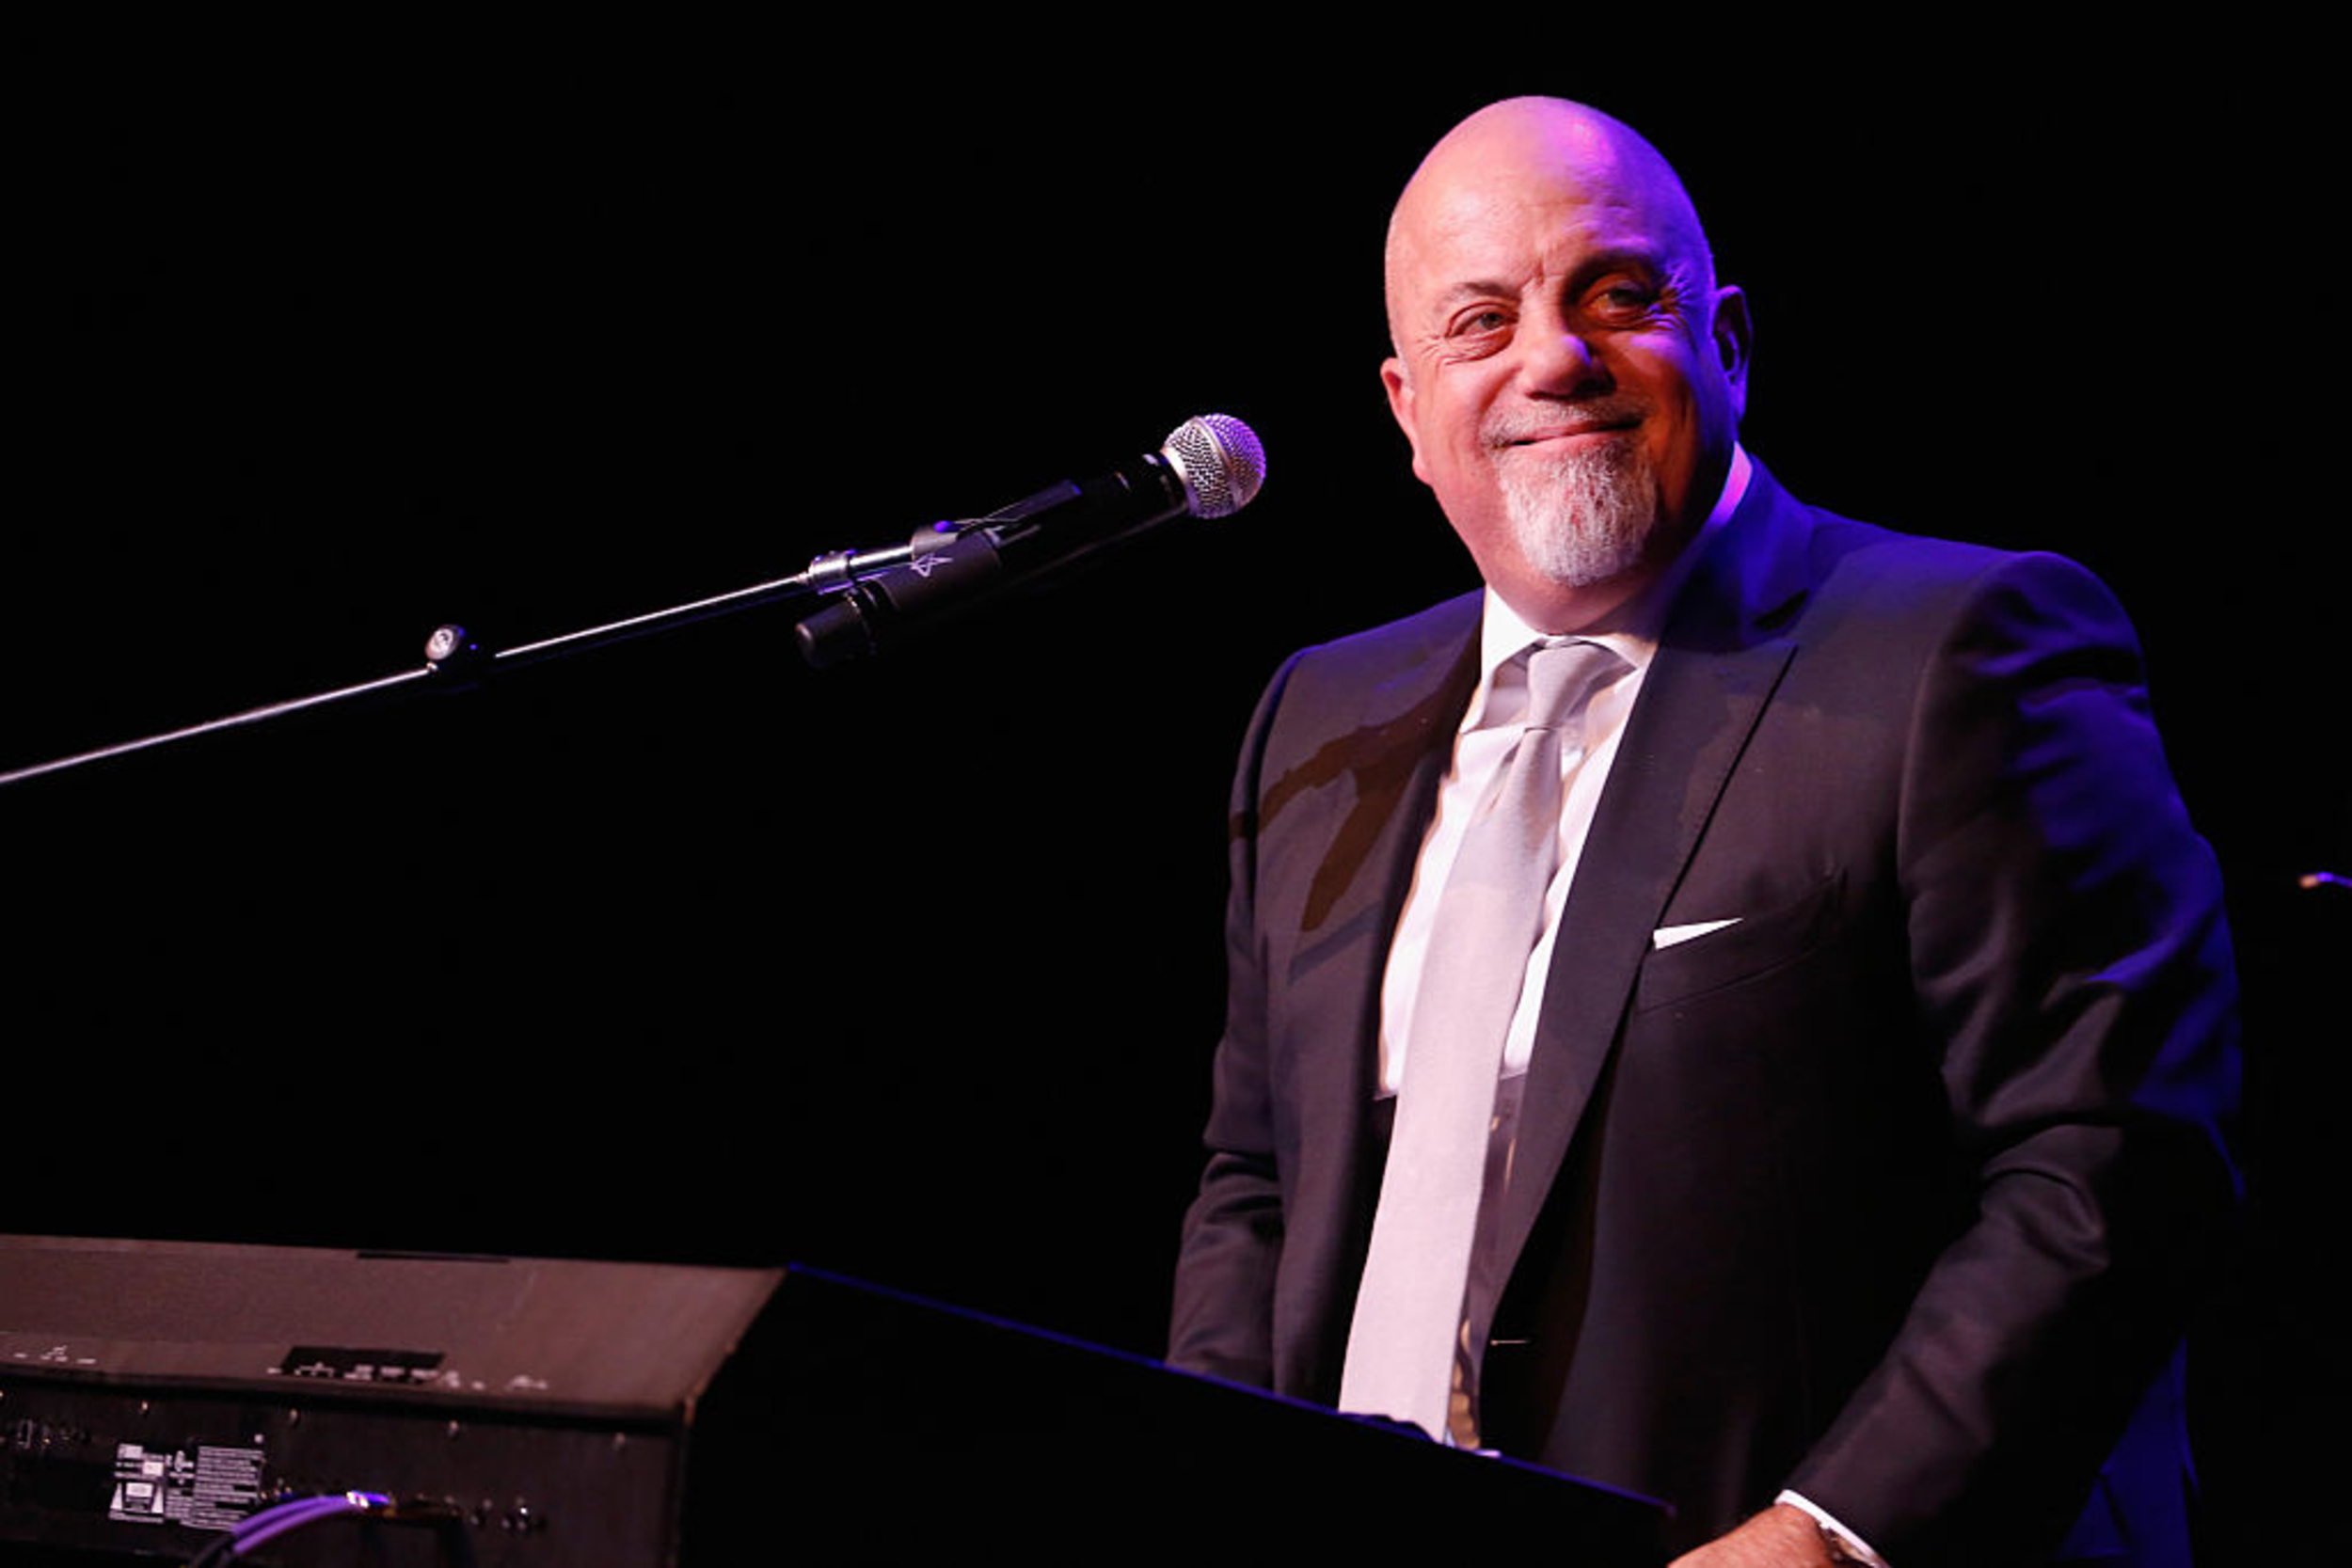 <p>While 2024 marks the end of Billy Joel’s long-running Madison Square Garden residency, he’s still taking his show on the road across several stadiums. For a few of the select shows, Joel will be joined by legendary acts Sting and Stevie Nicks. </p><p>You may also like: <a href='https://www.yardbarker.com/entertainment/articles/20_underrated_1970s_bands_022924/s1__39115149'>20 underrated 1970s bands</a></p>